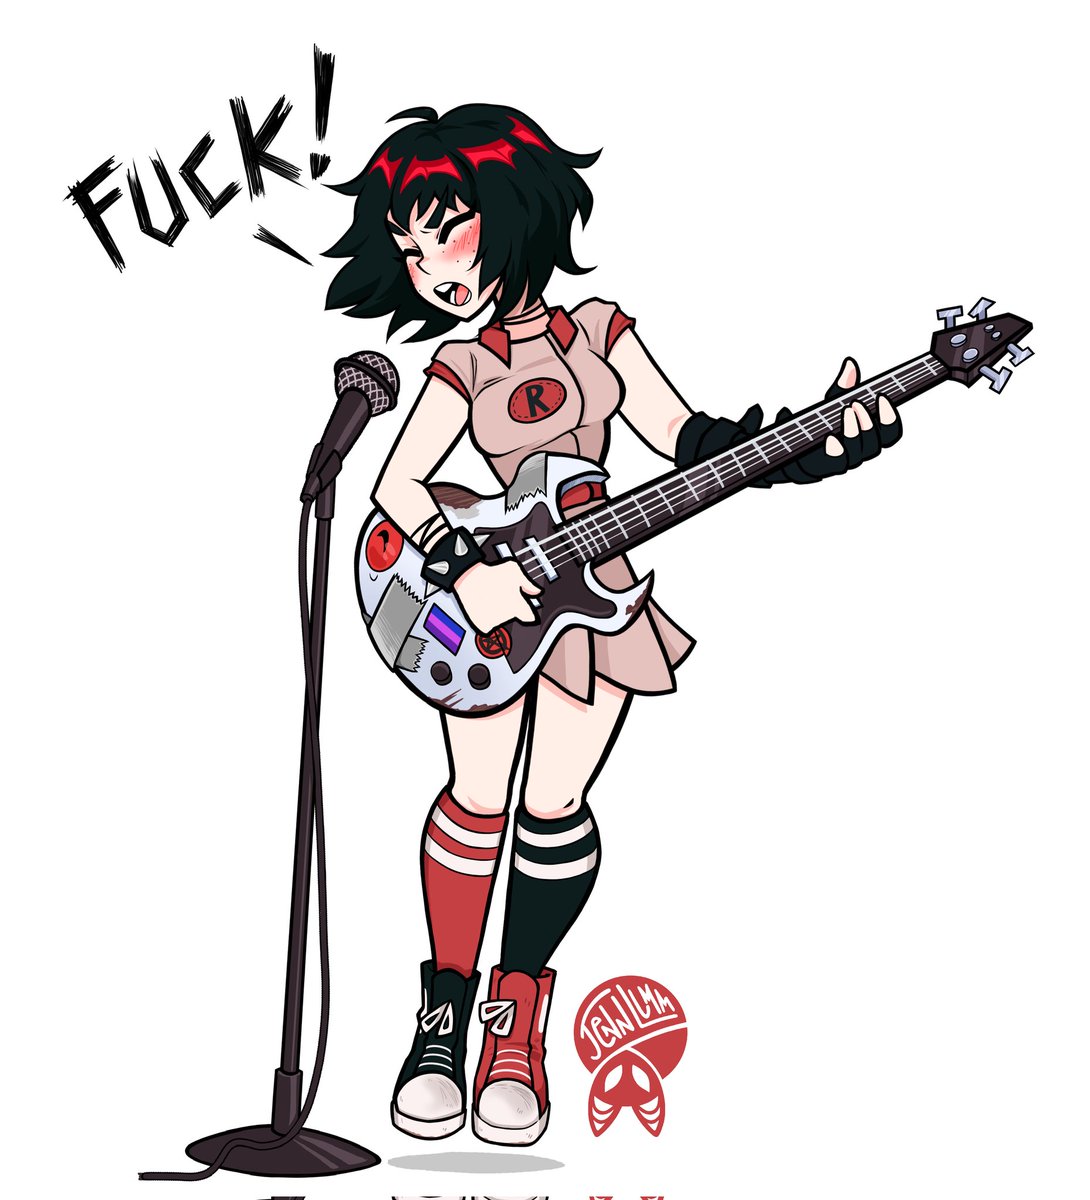 「GIRLS TO THE FRONT!! 」|🎸Mothman's Punk gf🎸のイラスト